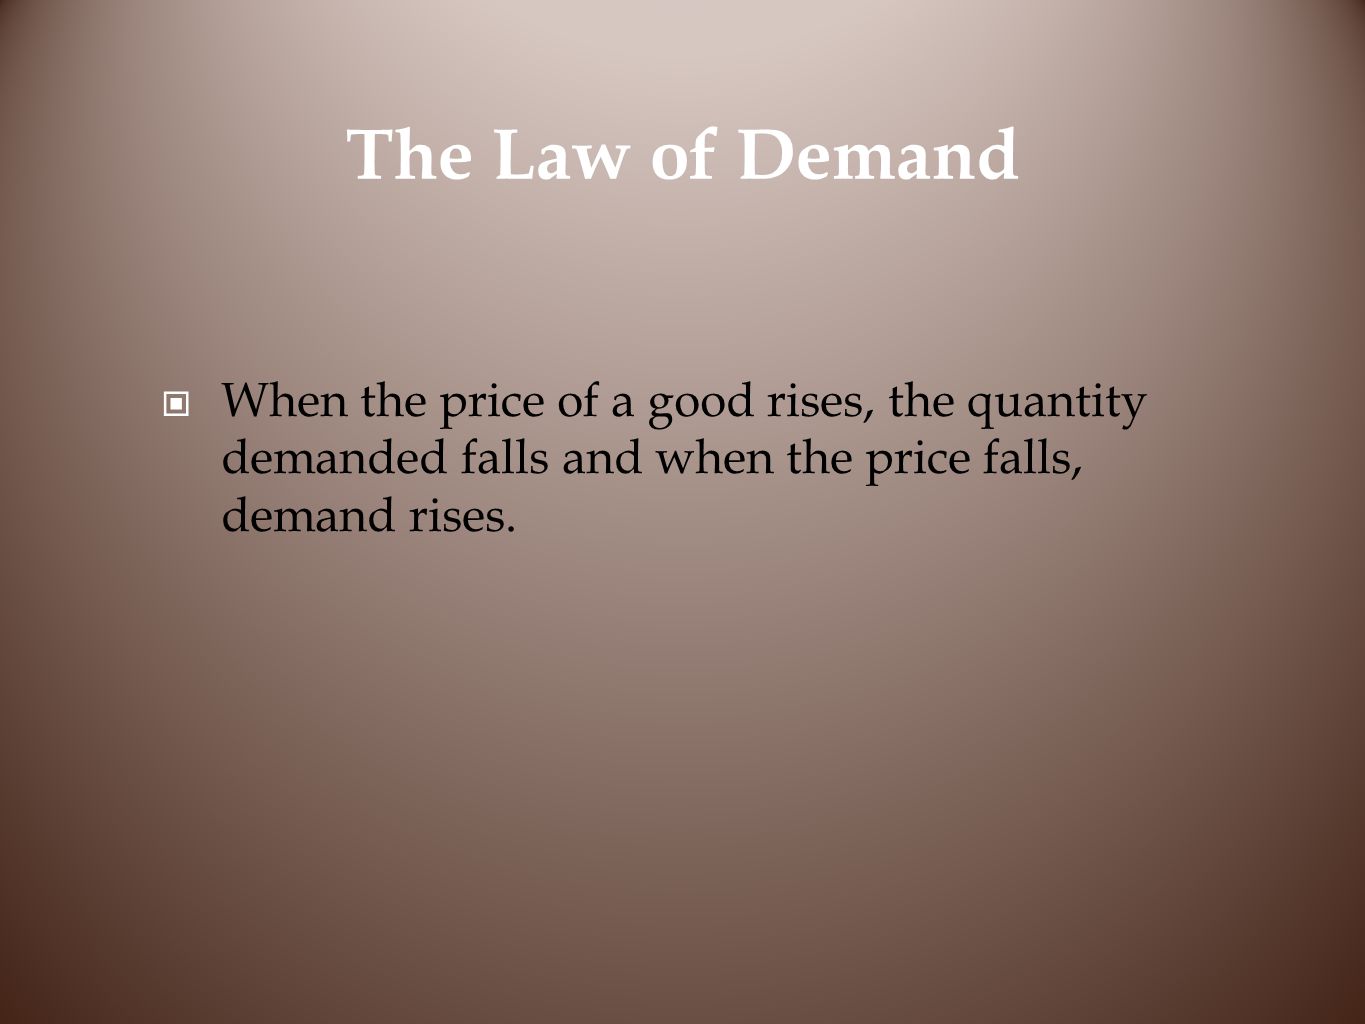 The Law of Demand When the price of a good rises, the quantity demanded falls and when the price falls, demand rises.